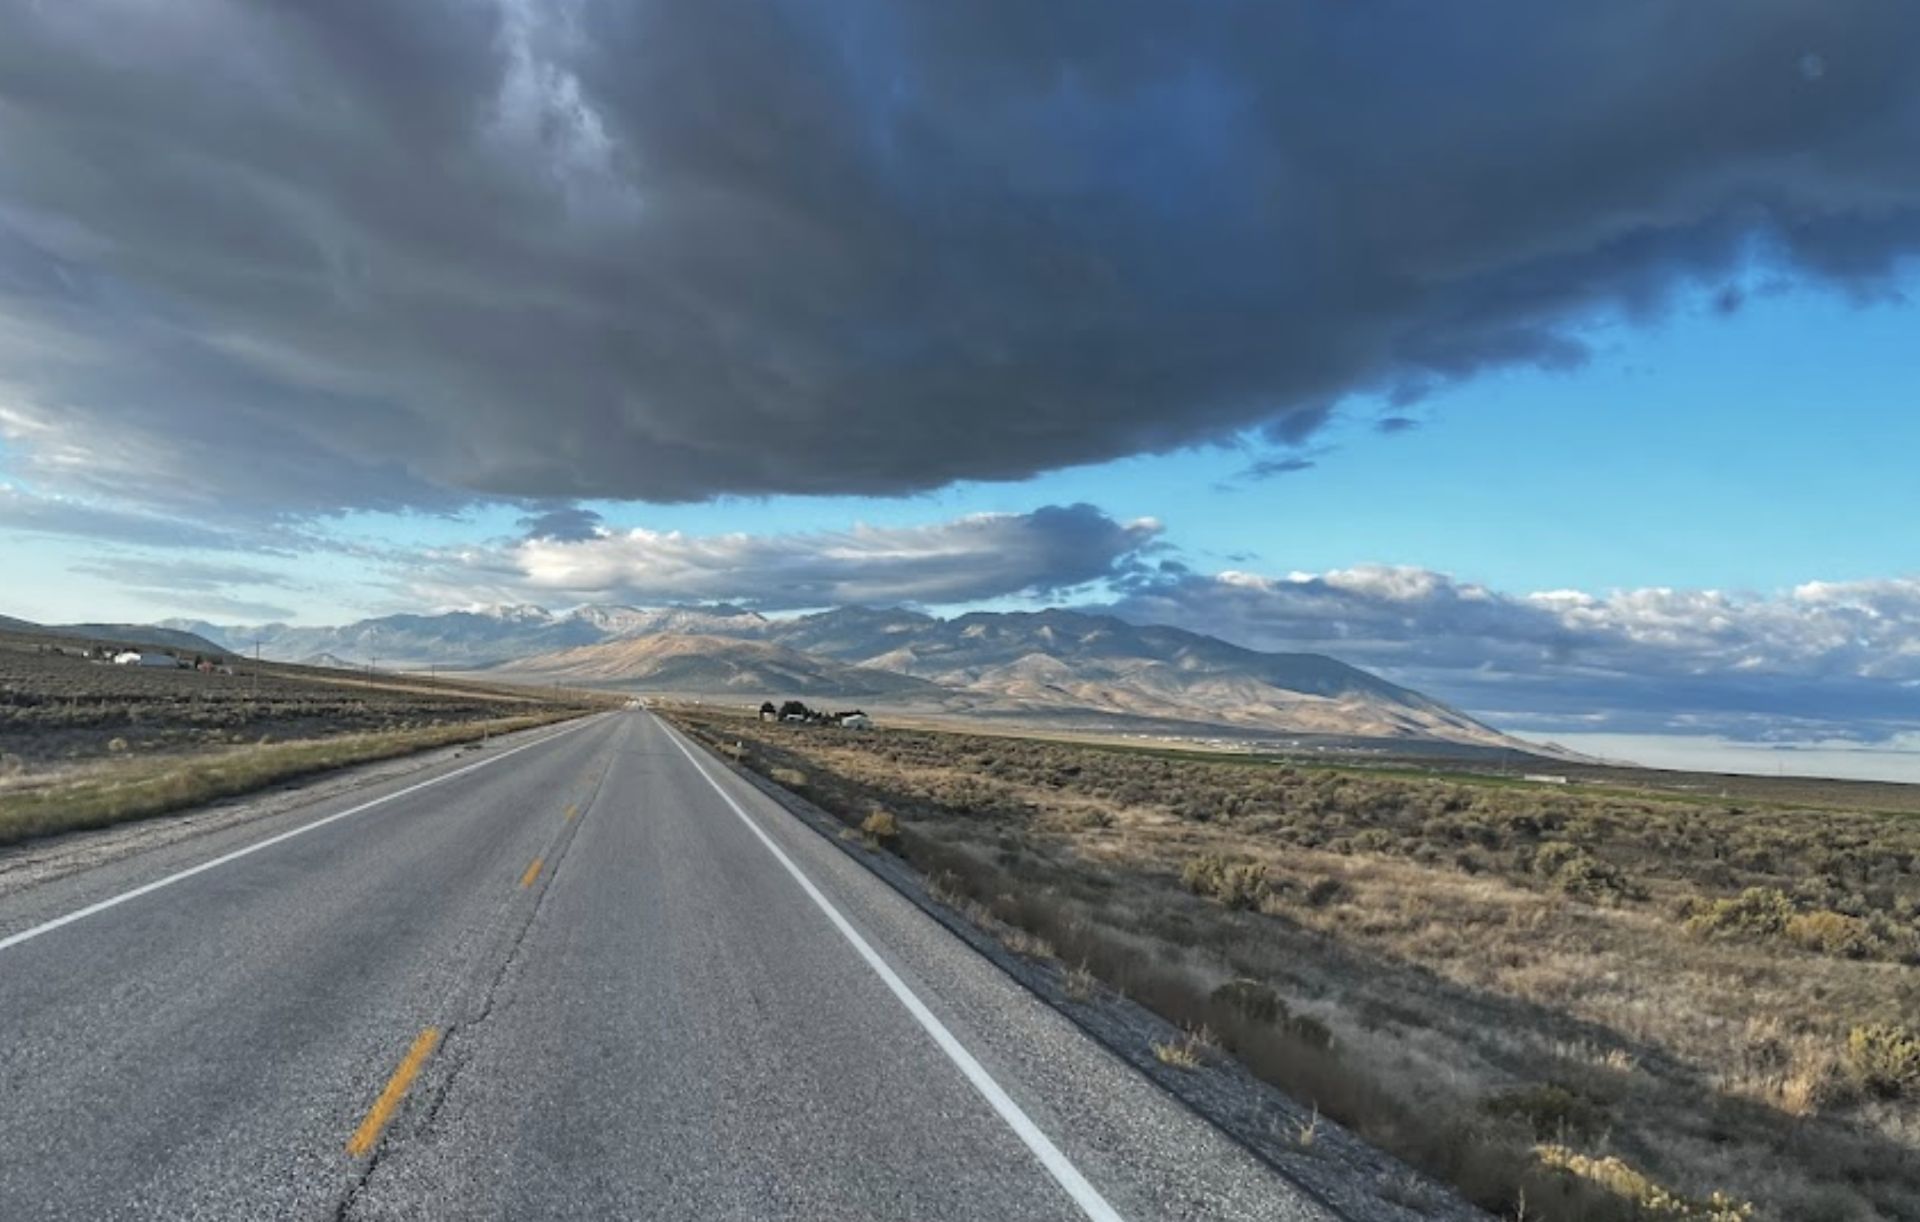 Diversify Your Land Portfolio with 41 Acres of Nevada! - Image 2 of 14